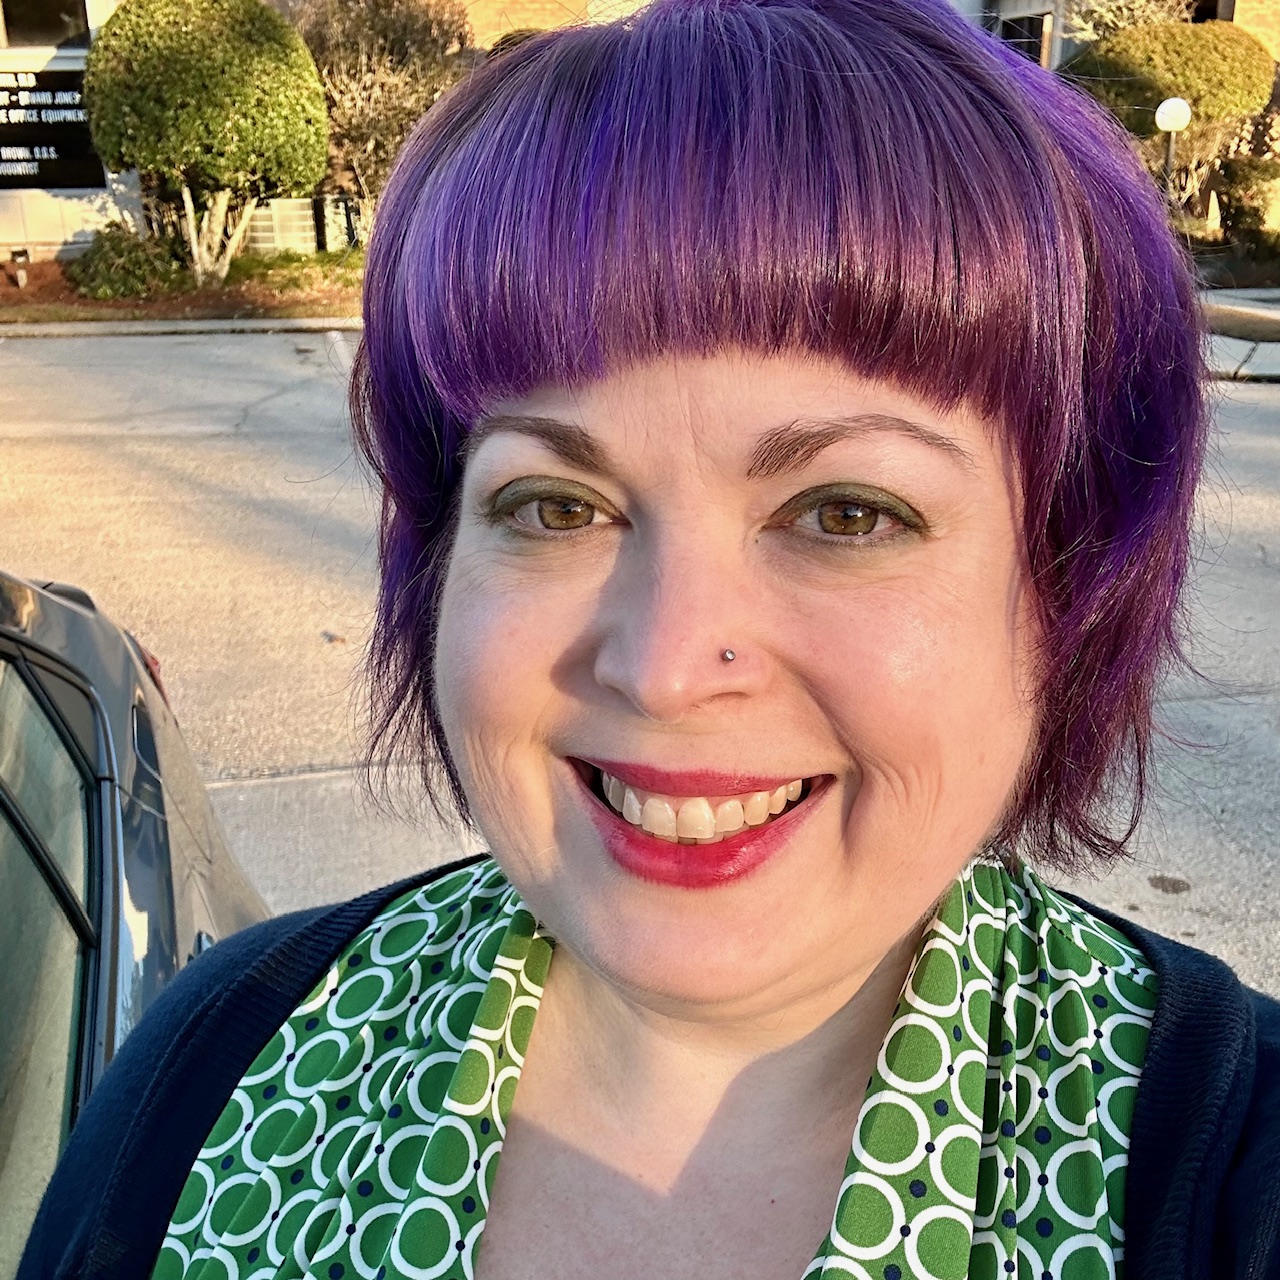 Picture of Karen. She has a purple bob hairstyle, is wearing a green patterned dress and a navy cardigan, and is smiling at the camera.